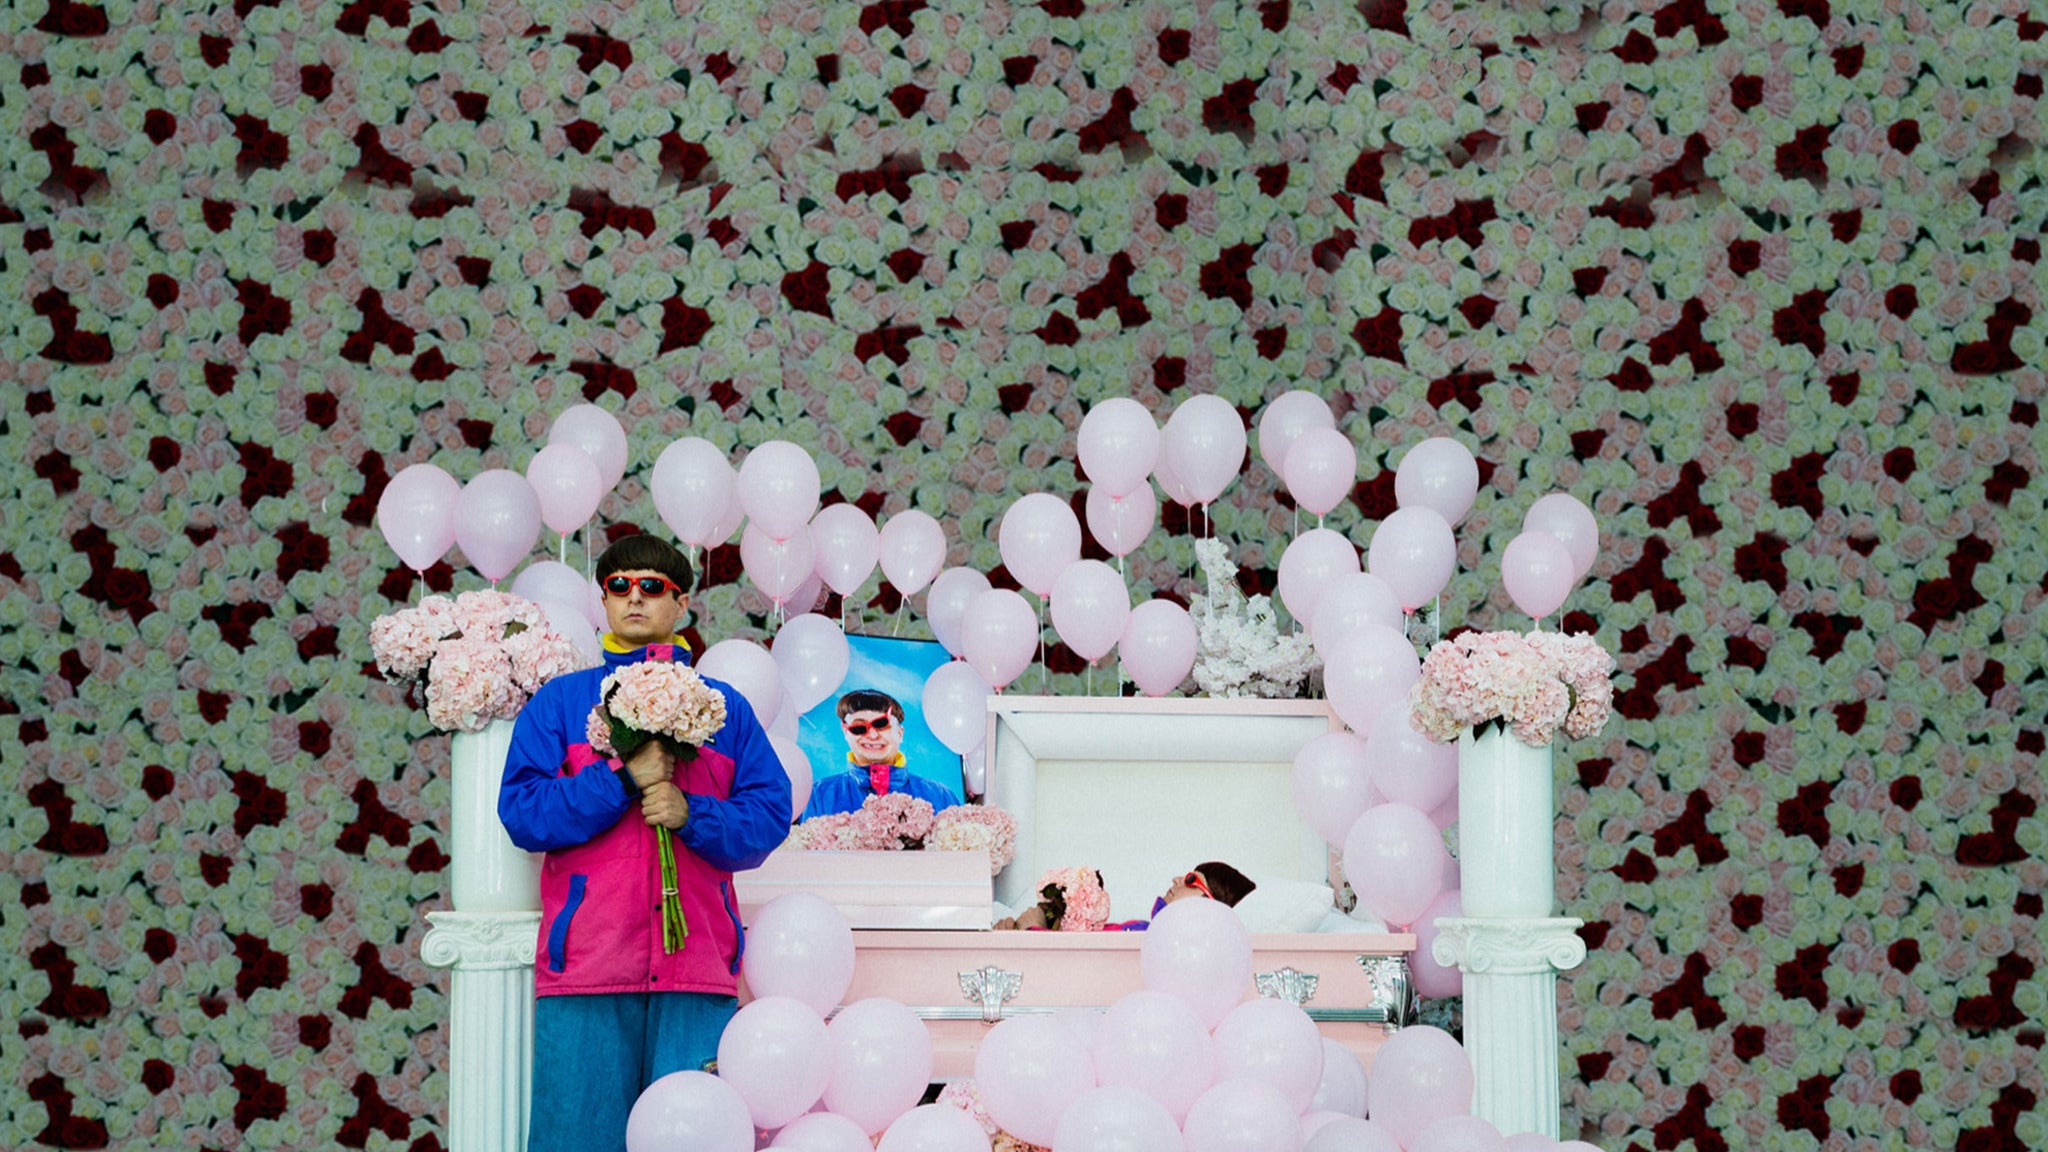 Oliver Tree: Goodbye Farewell Tour in Cleveland promo photo for Artist presale offer code